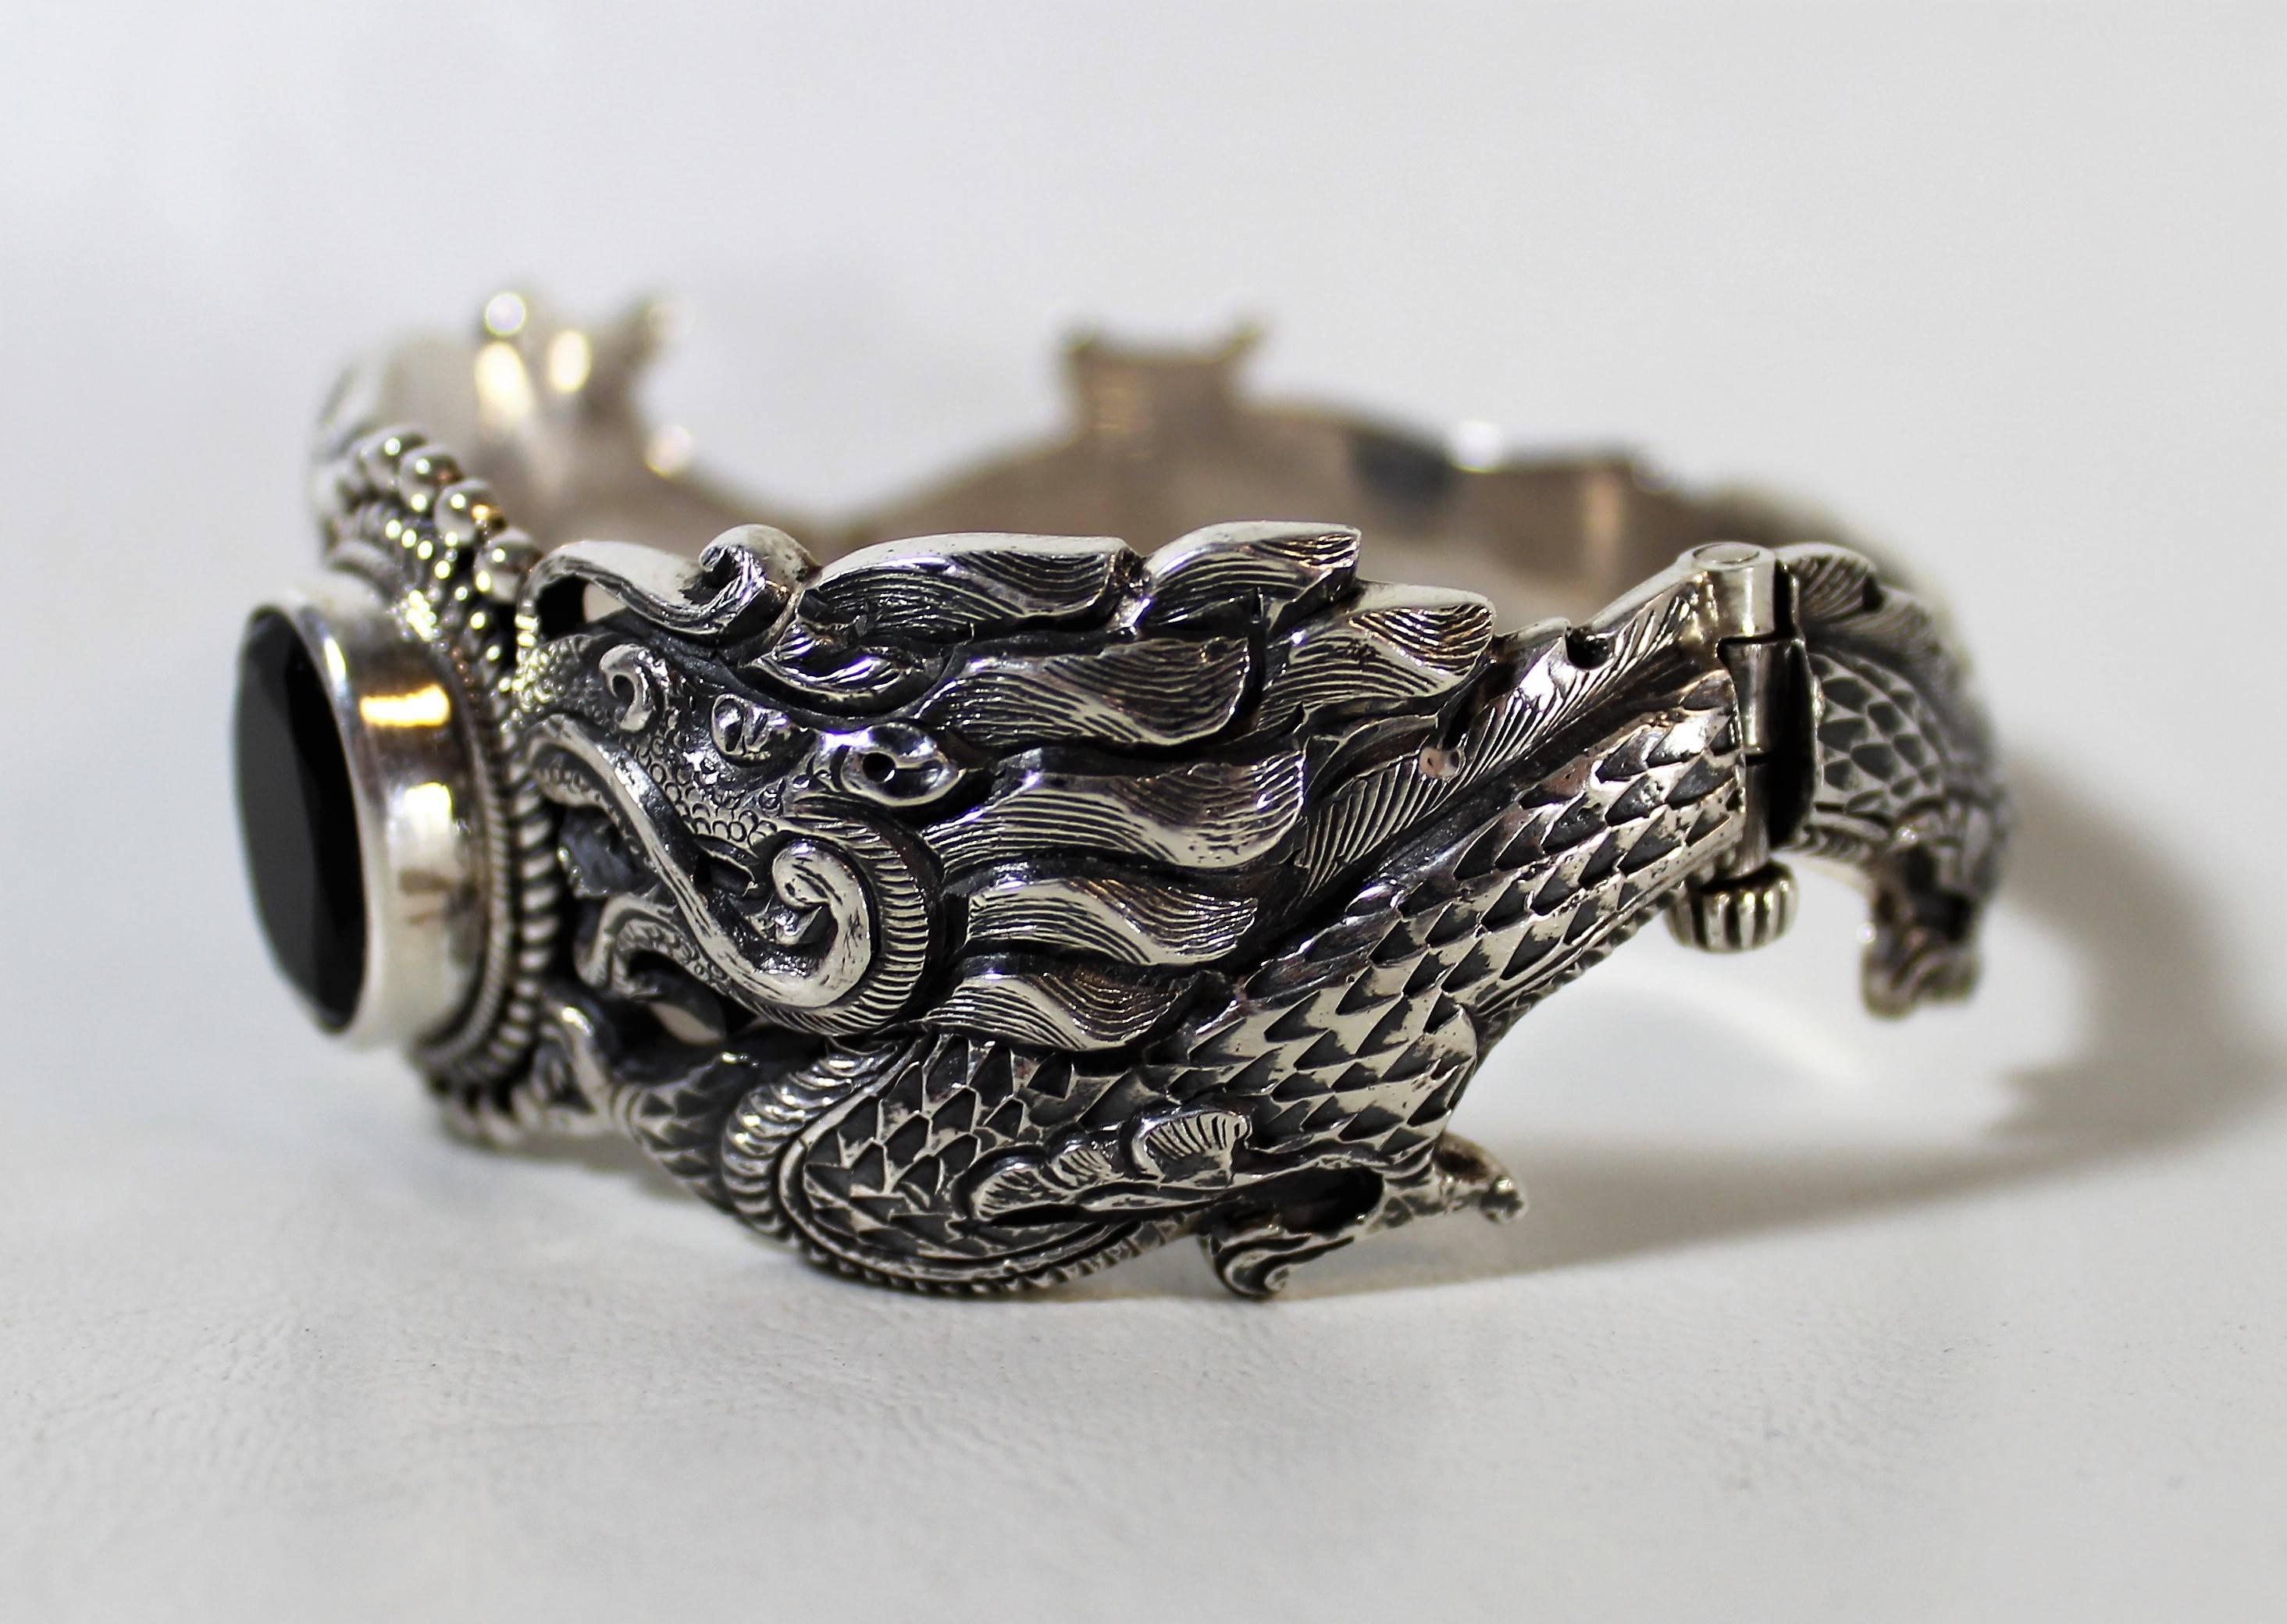 Nepalese sterling silver and onyx dragon bracelet. Weight: 90 grams.